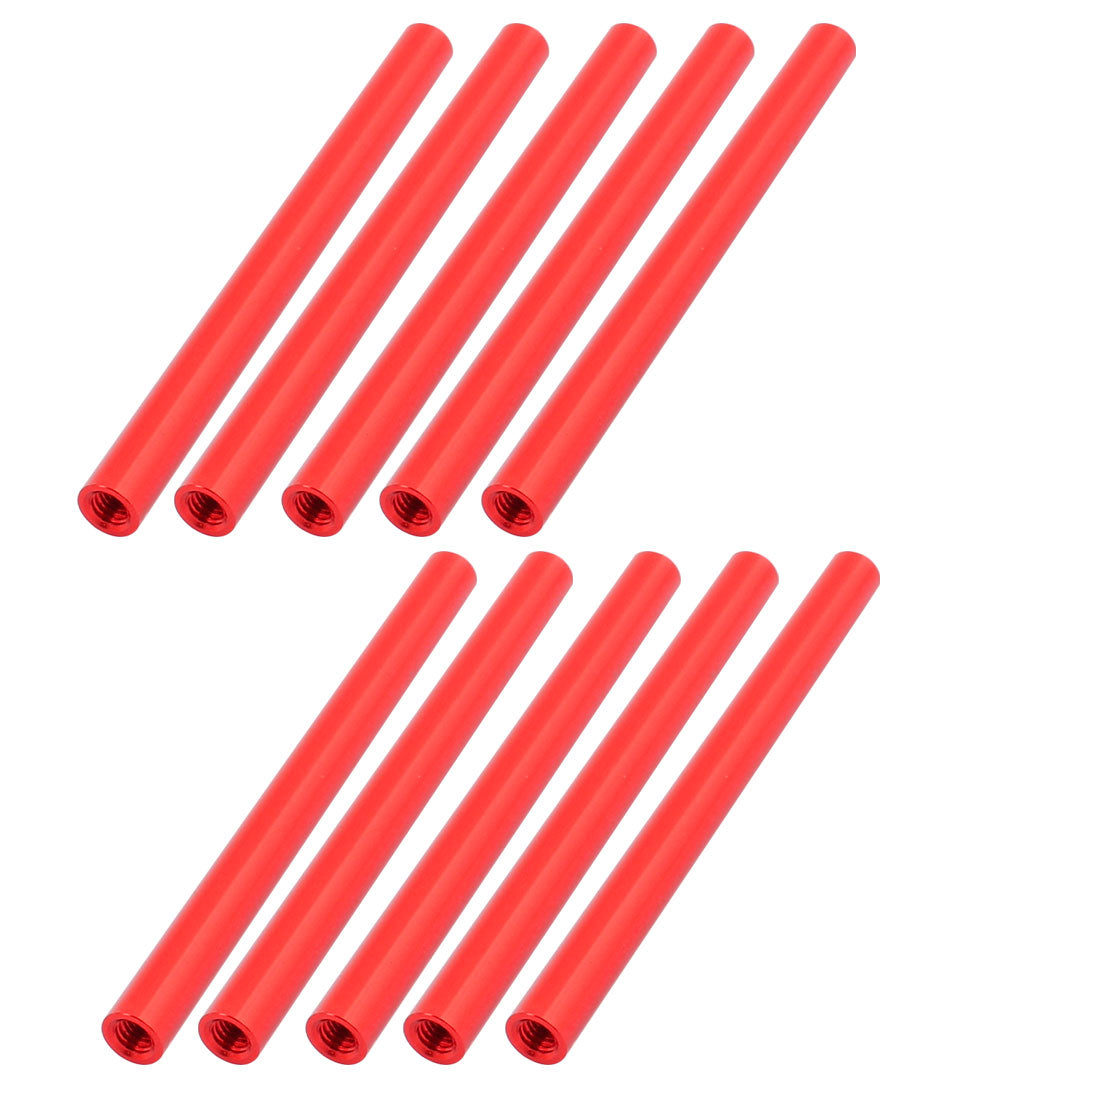 uxcell Uxcell 10 Pcs M3 x 60mm Round Aluminum Column Alloy Standoff Spacer Stud Fastener for Quadcopter Red